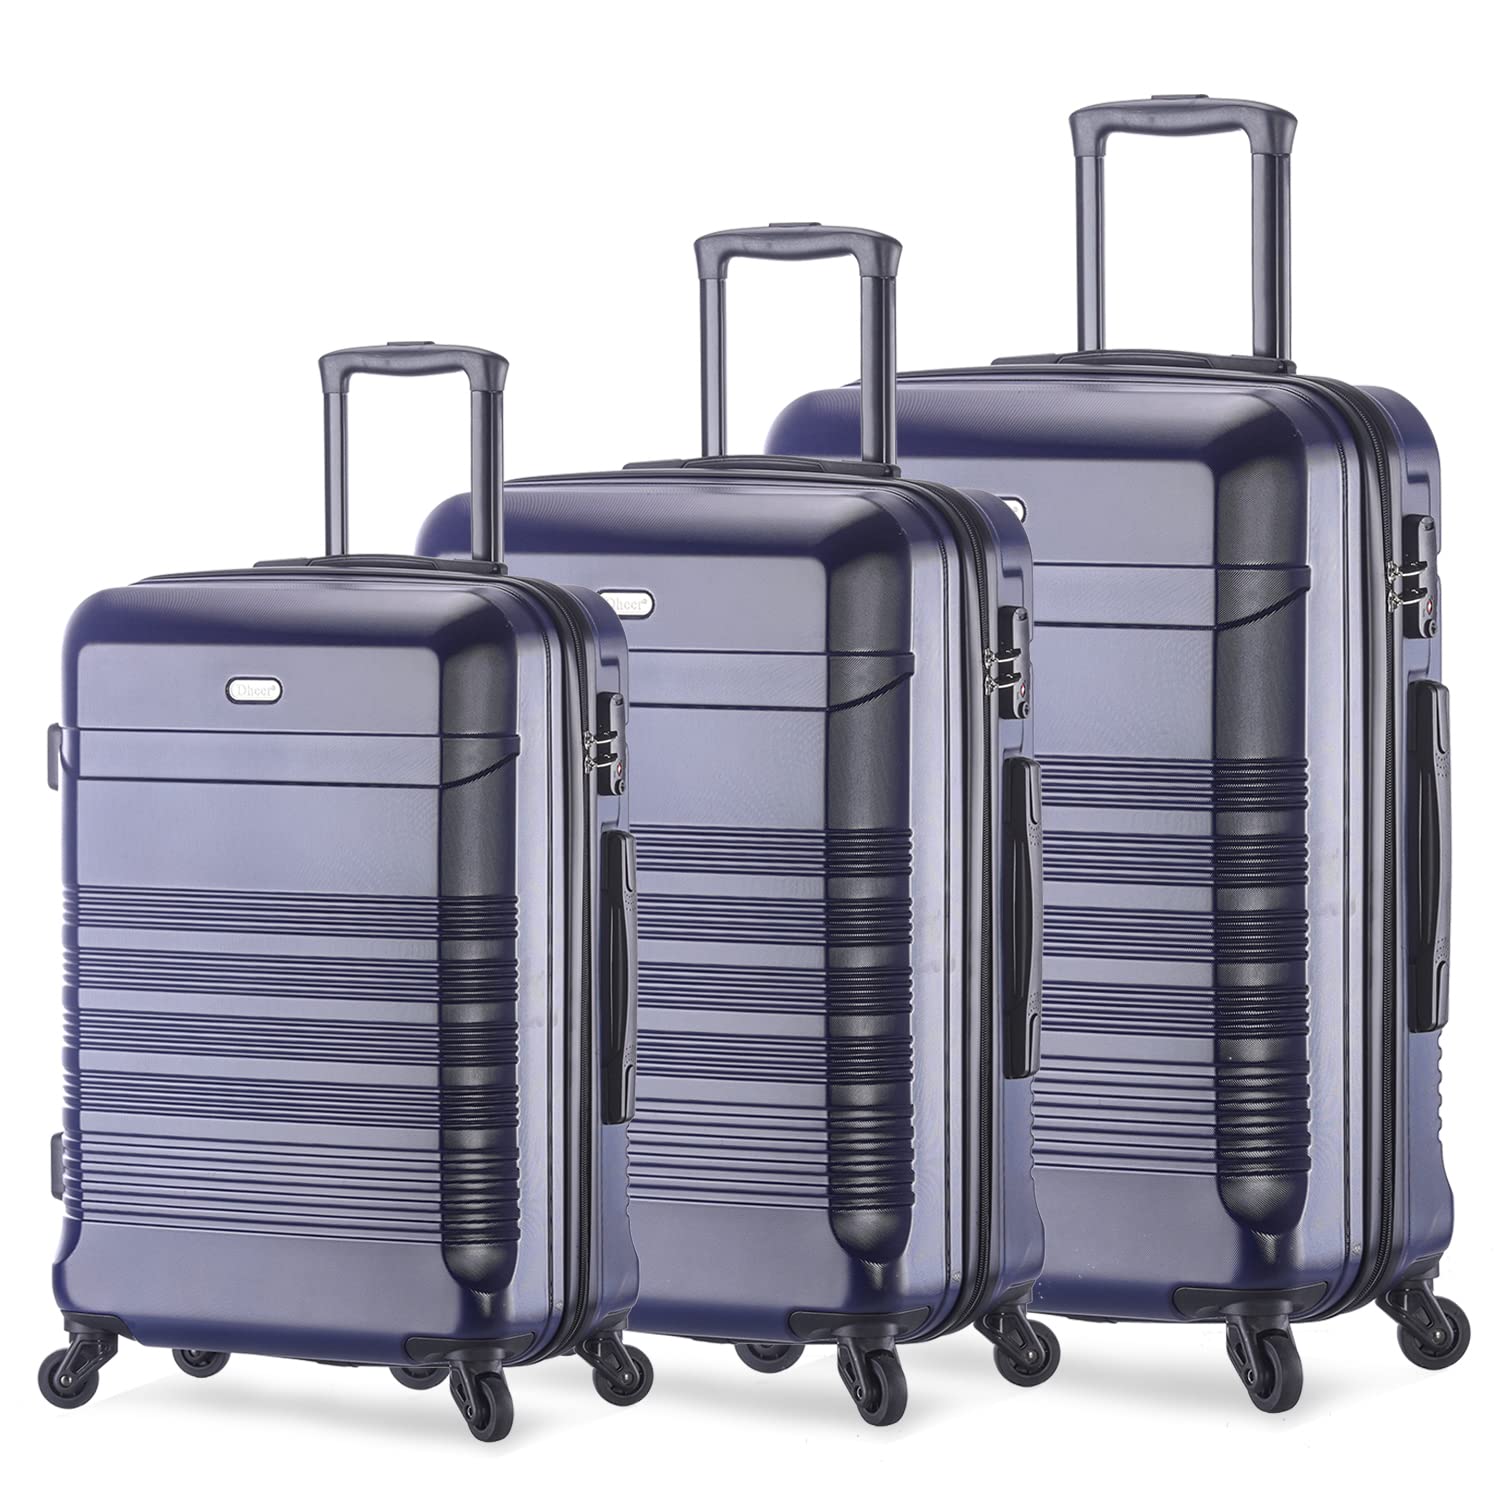 Dheer Luggage Set of 3 (202428 Only) Travel case with Swivel Single Wheel Light Pc+ABS TSA Lock (blue)